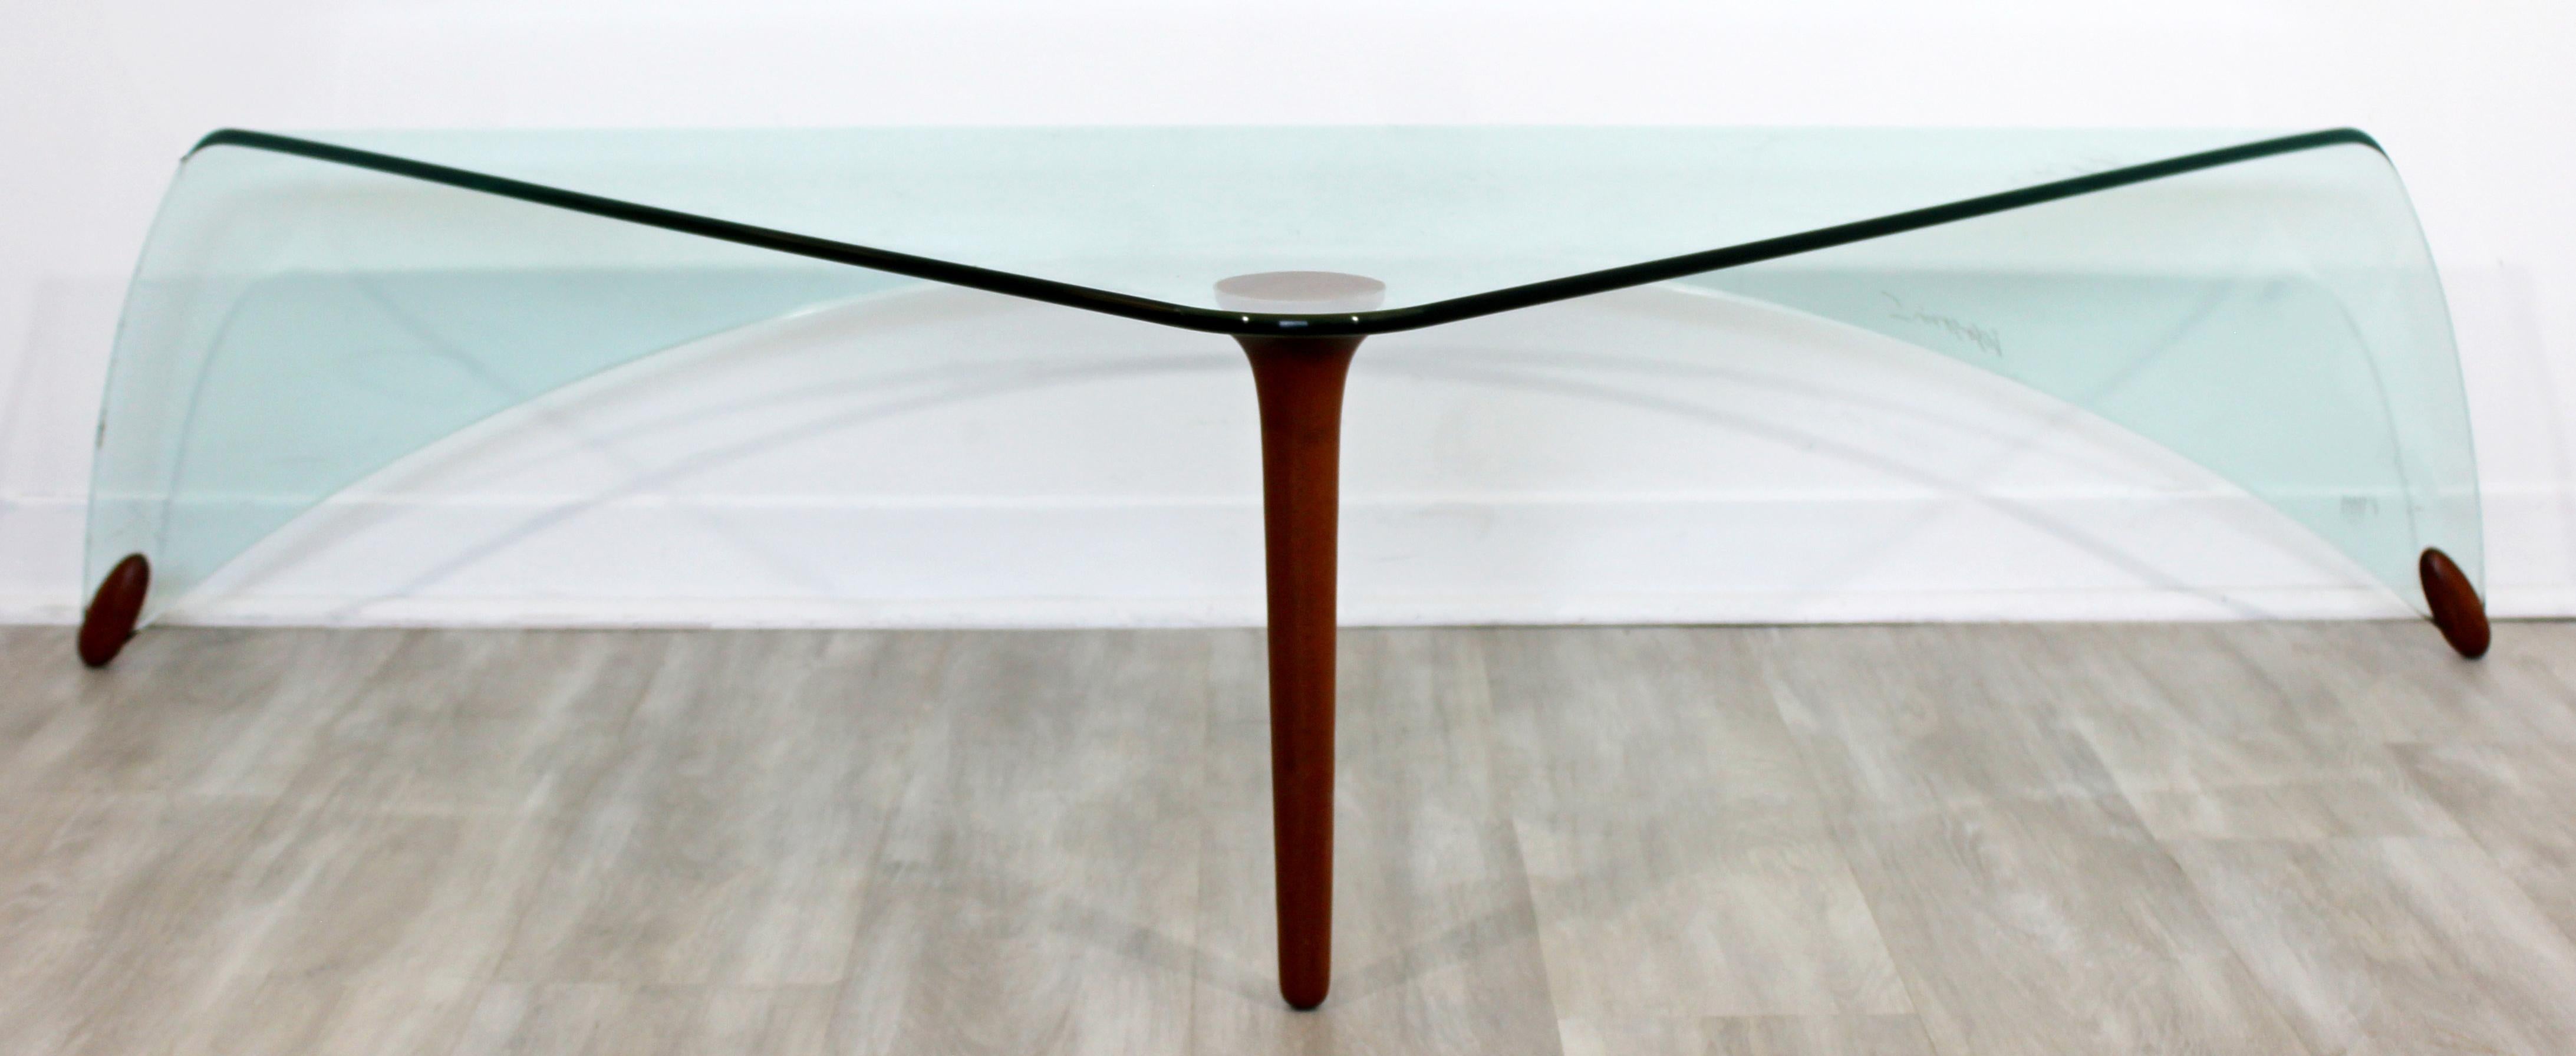 For your consideration is a show-stopping piece of art in the shape of a slumped and draped glass coffee table, signed and made by Fiam Italia, circa 1990s. In very good vintage condition. The dimensions are 62